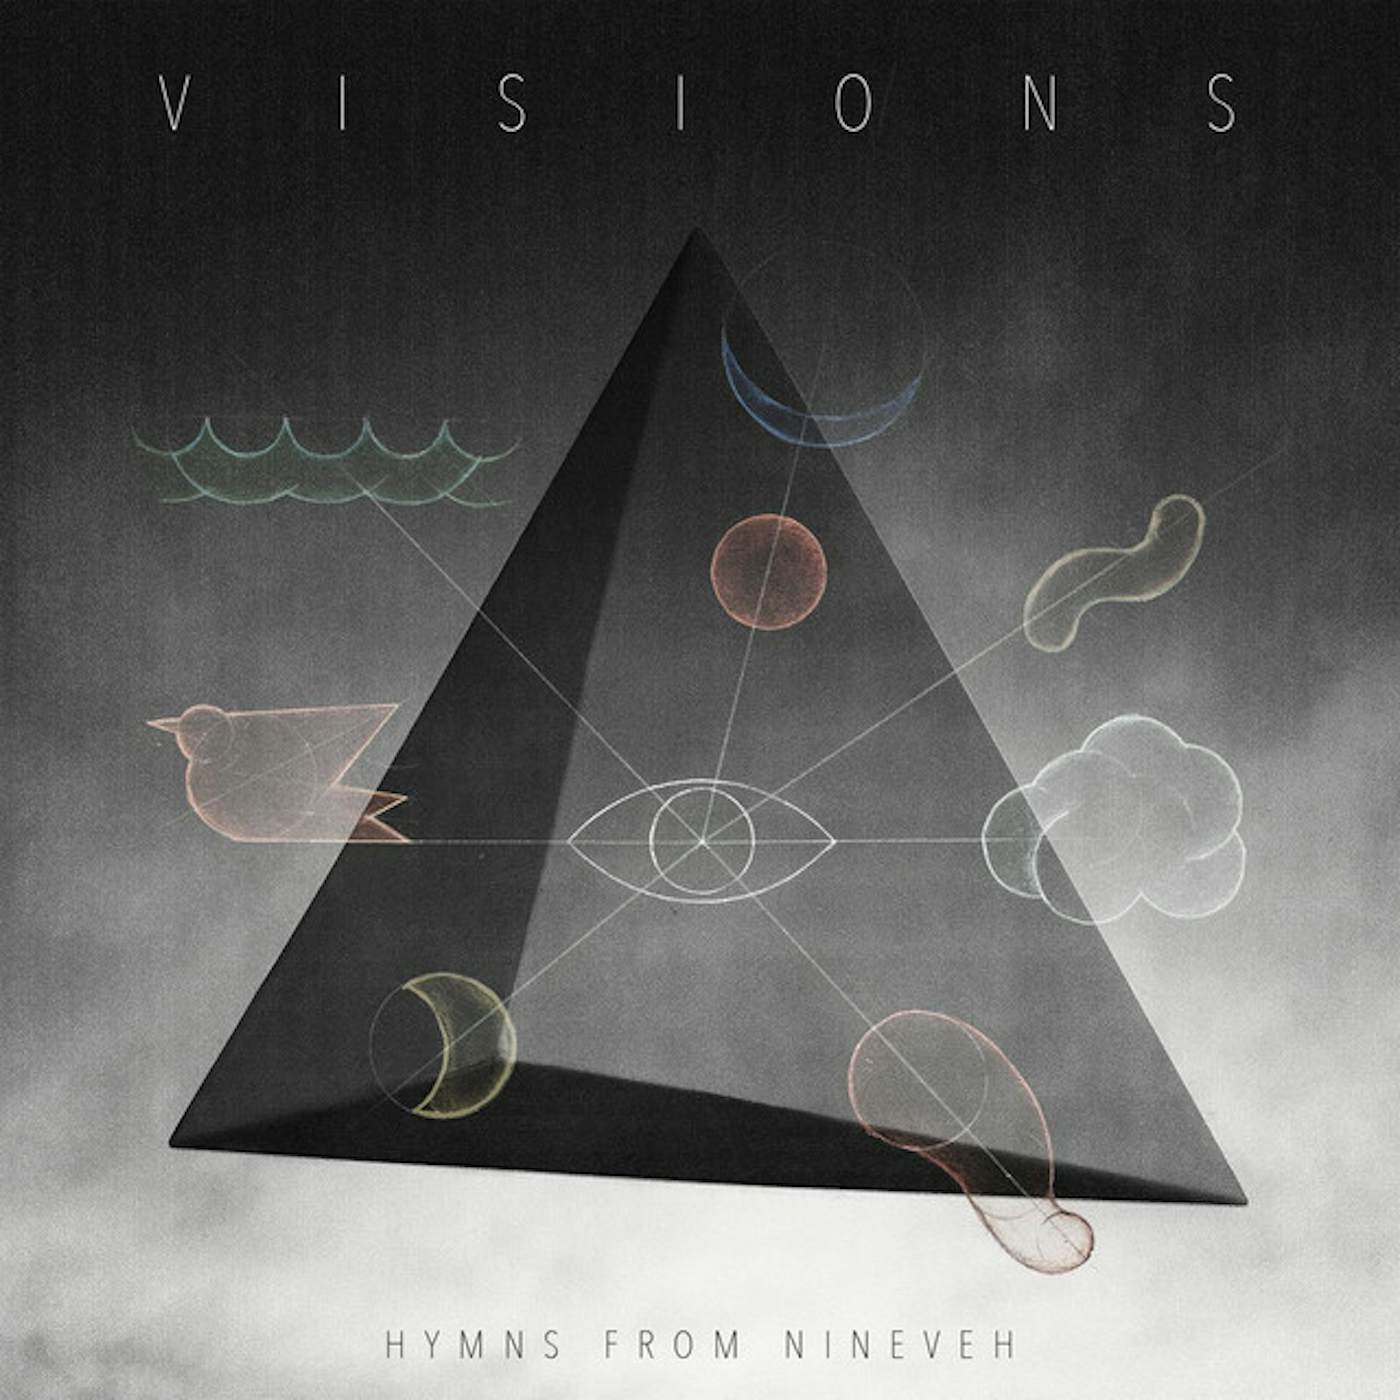 Hymns from Nineveh Visions Vinyl Record